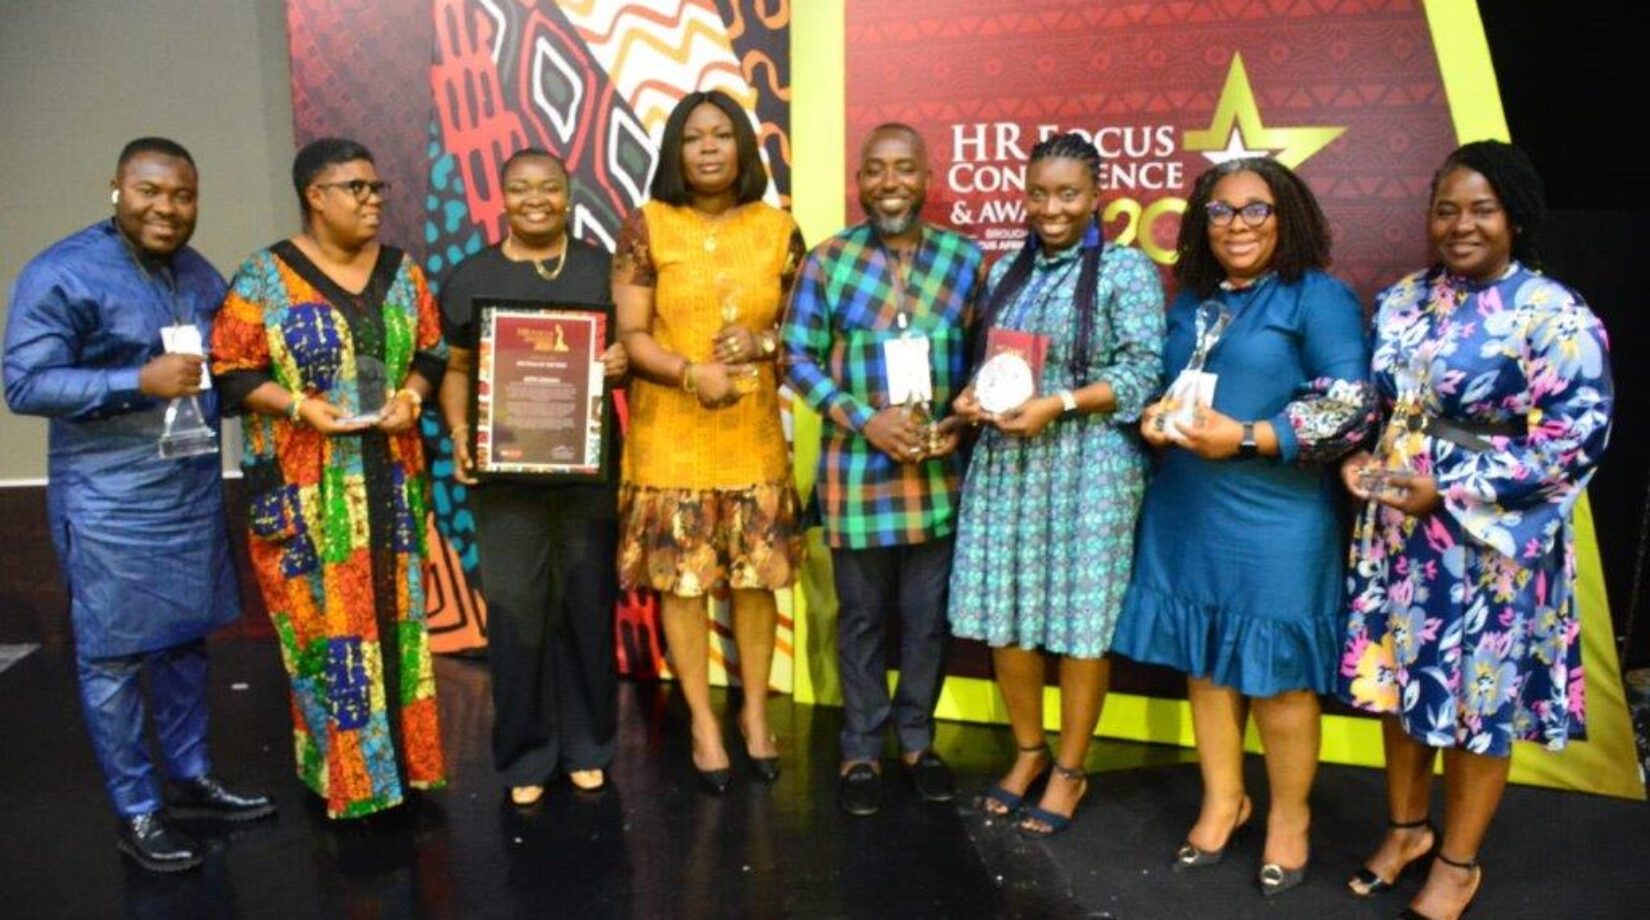 MTN GHANA WINS SIX AWARDS, MAINTAINED IN HR FOCUS HALL OF FAME